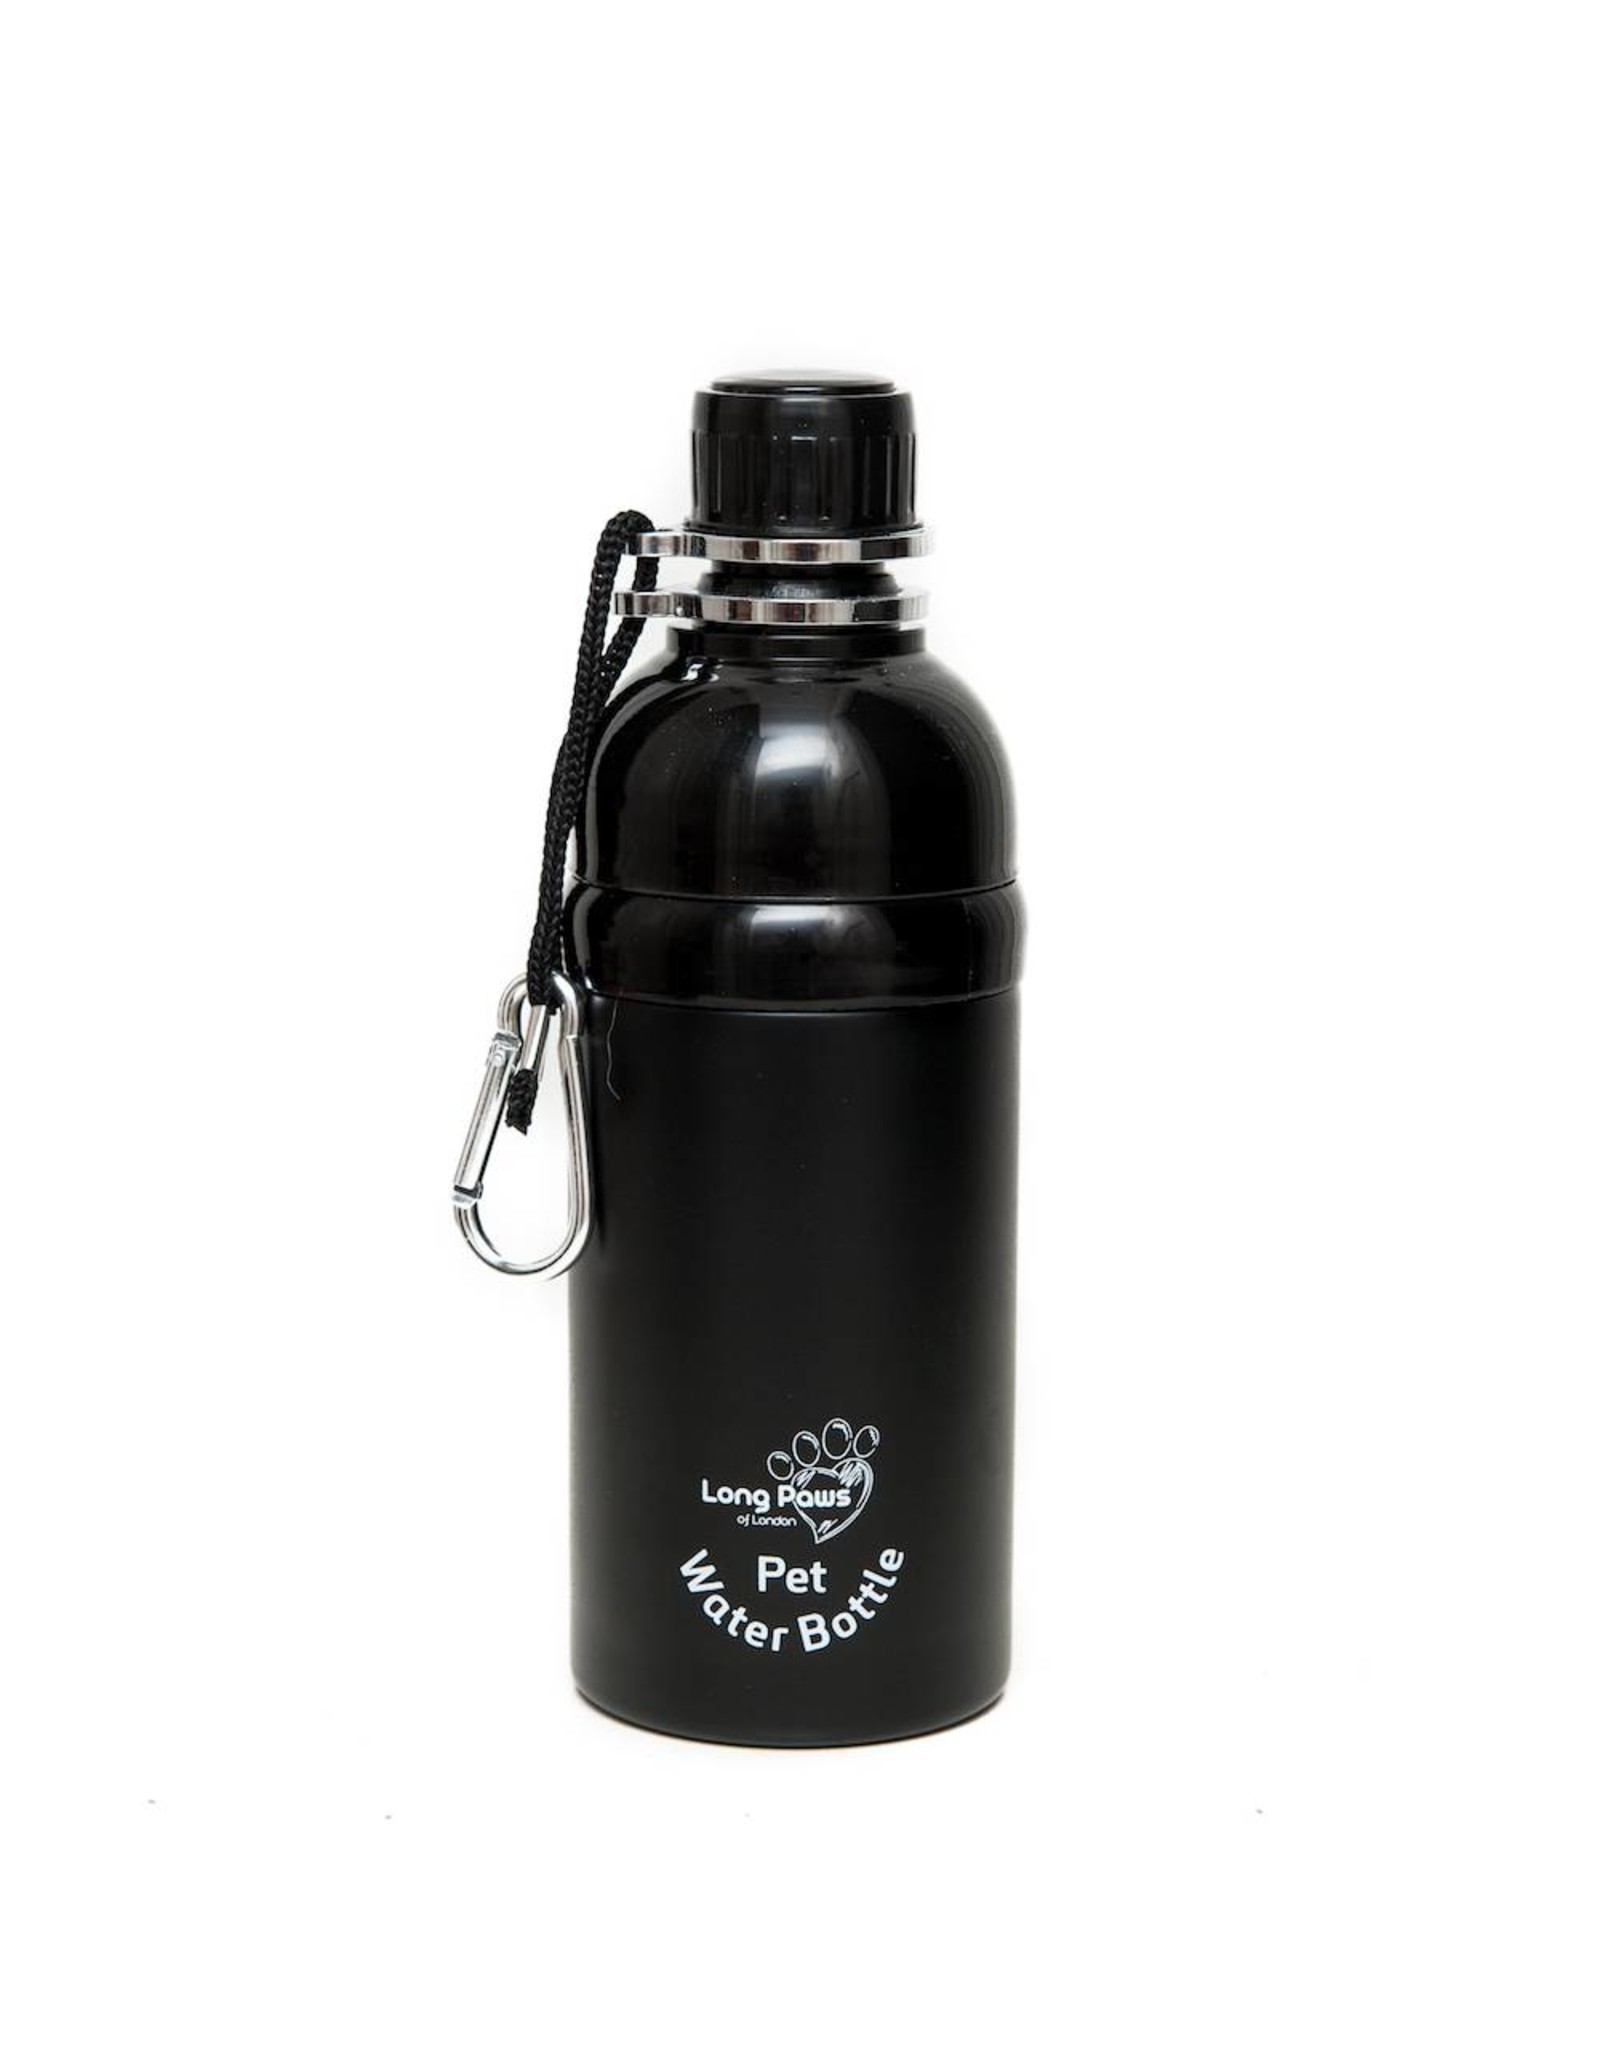 long paws water bottle